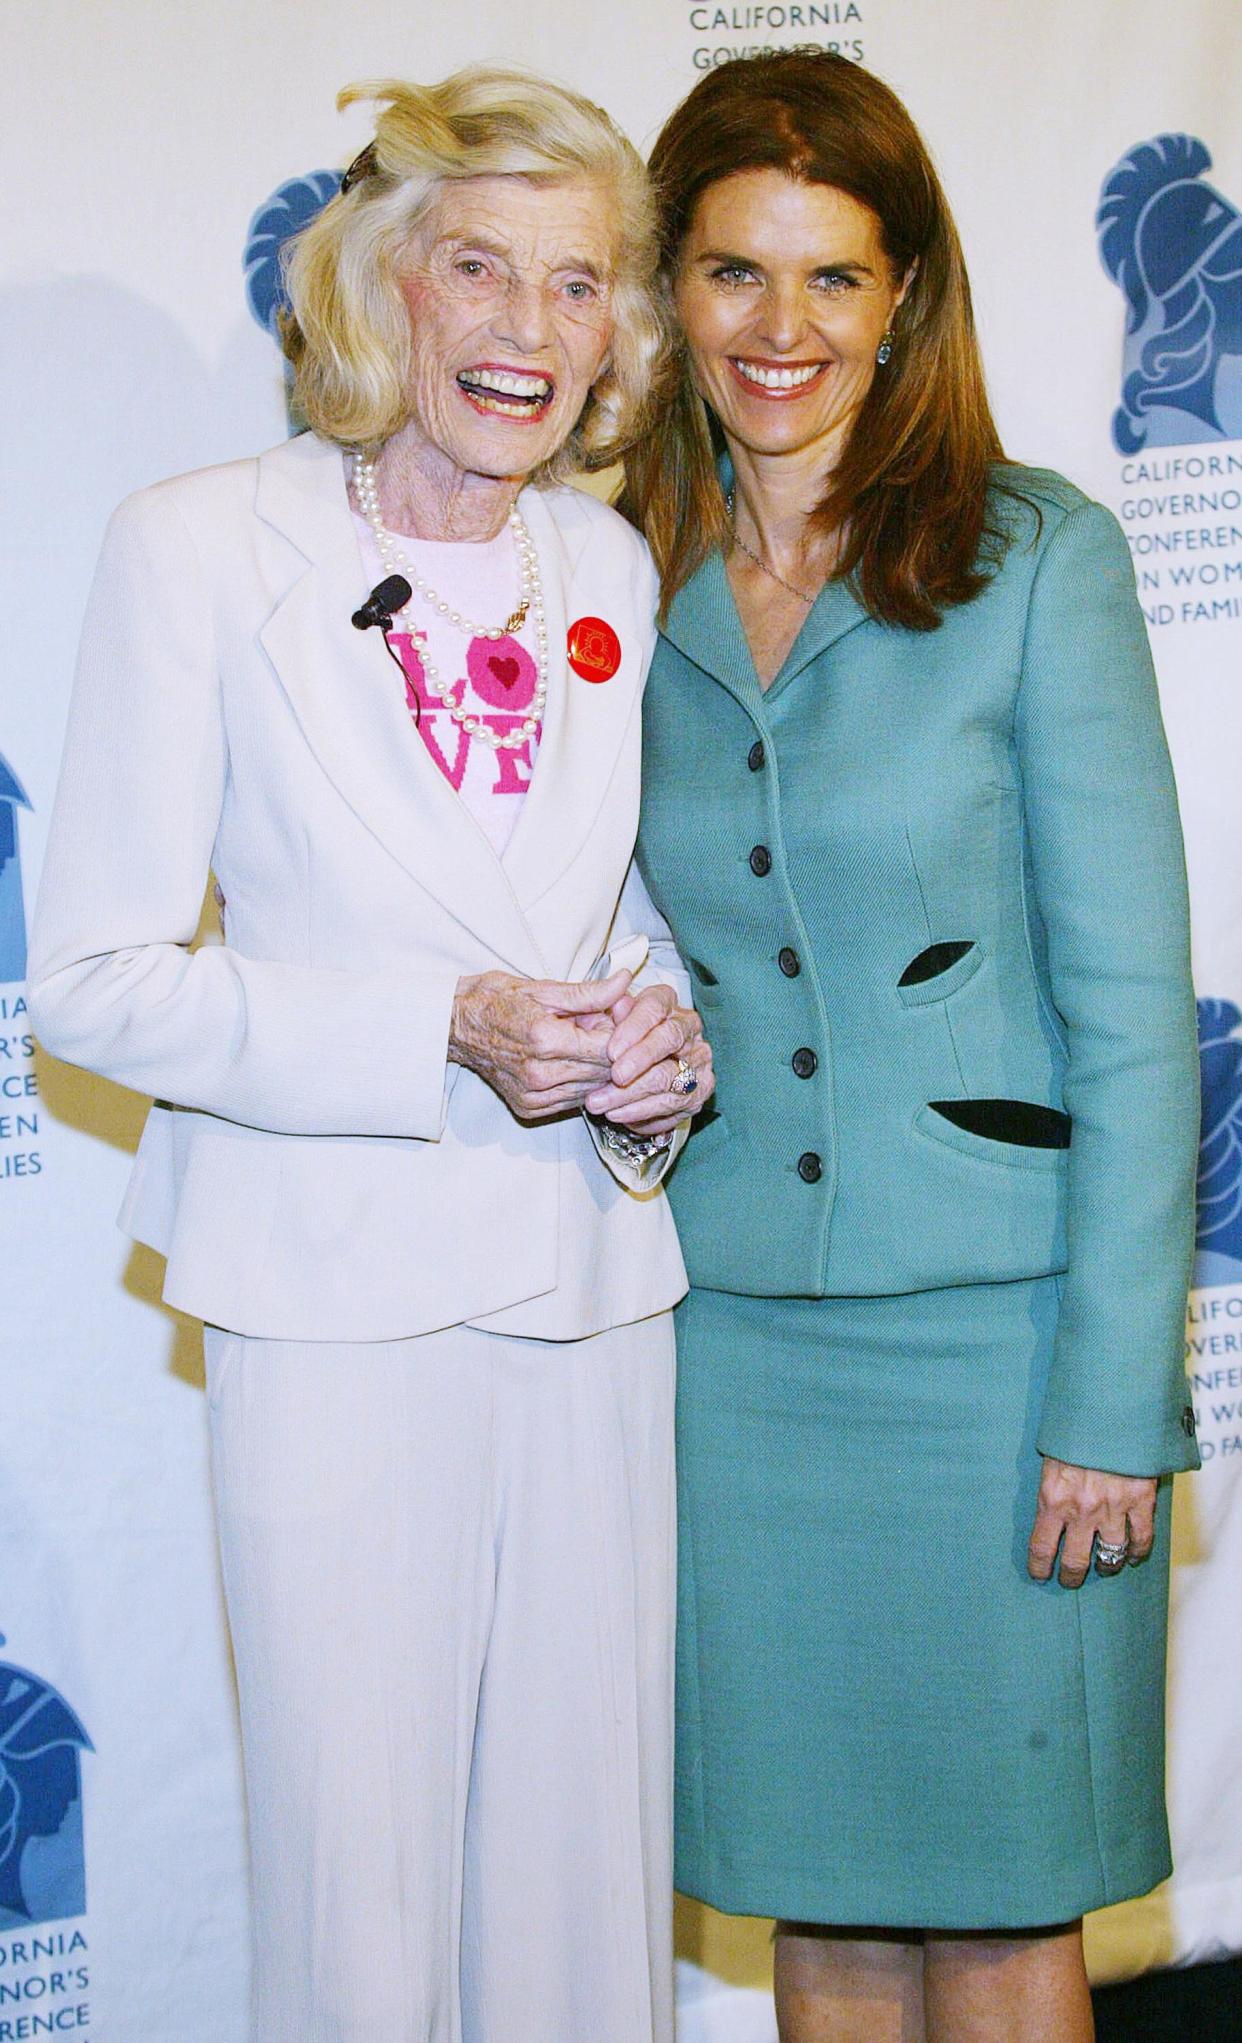 LONG BEACH, CA - DECEMBER 7:  (L-R) Eunice Shriver and Maria Shriver attend the California Governor's Conference on Women and Families at the Long Beach Convention Center on December 7, 2004 in Long Beach, California.  (Photo by Frederick M. Brown/Getty Images)